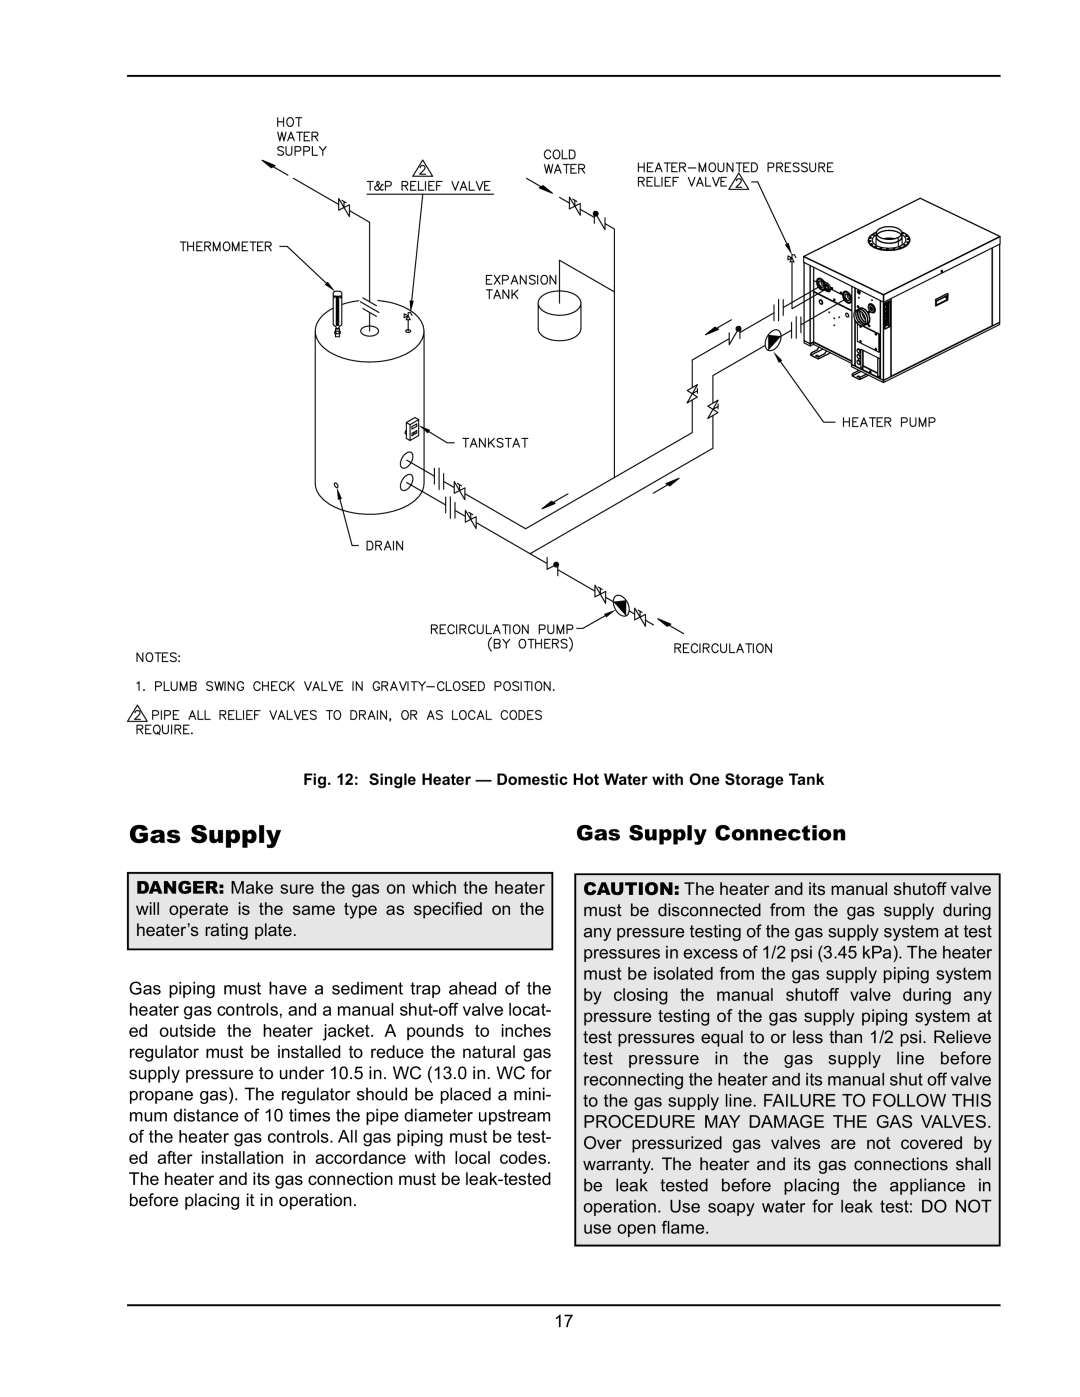 Raypak HD101, HD401 operating instructions Gas Supply Connection 